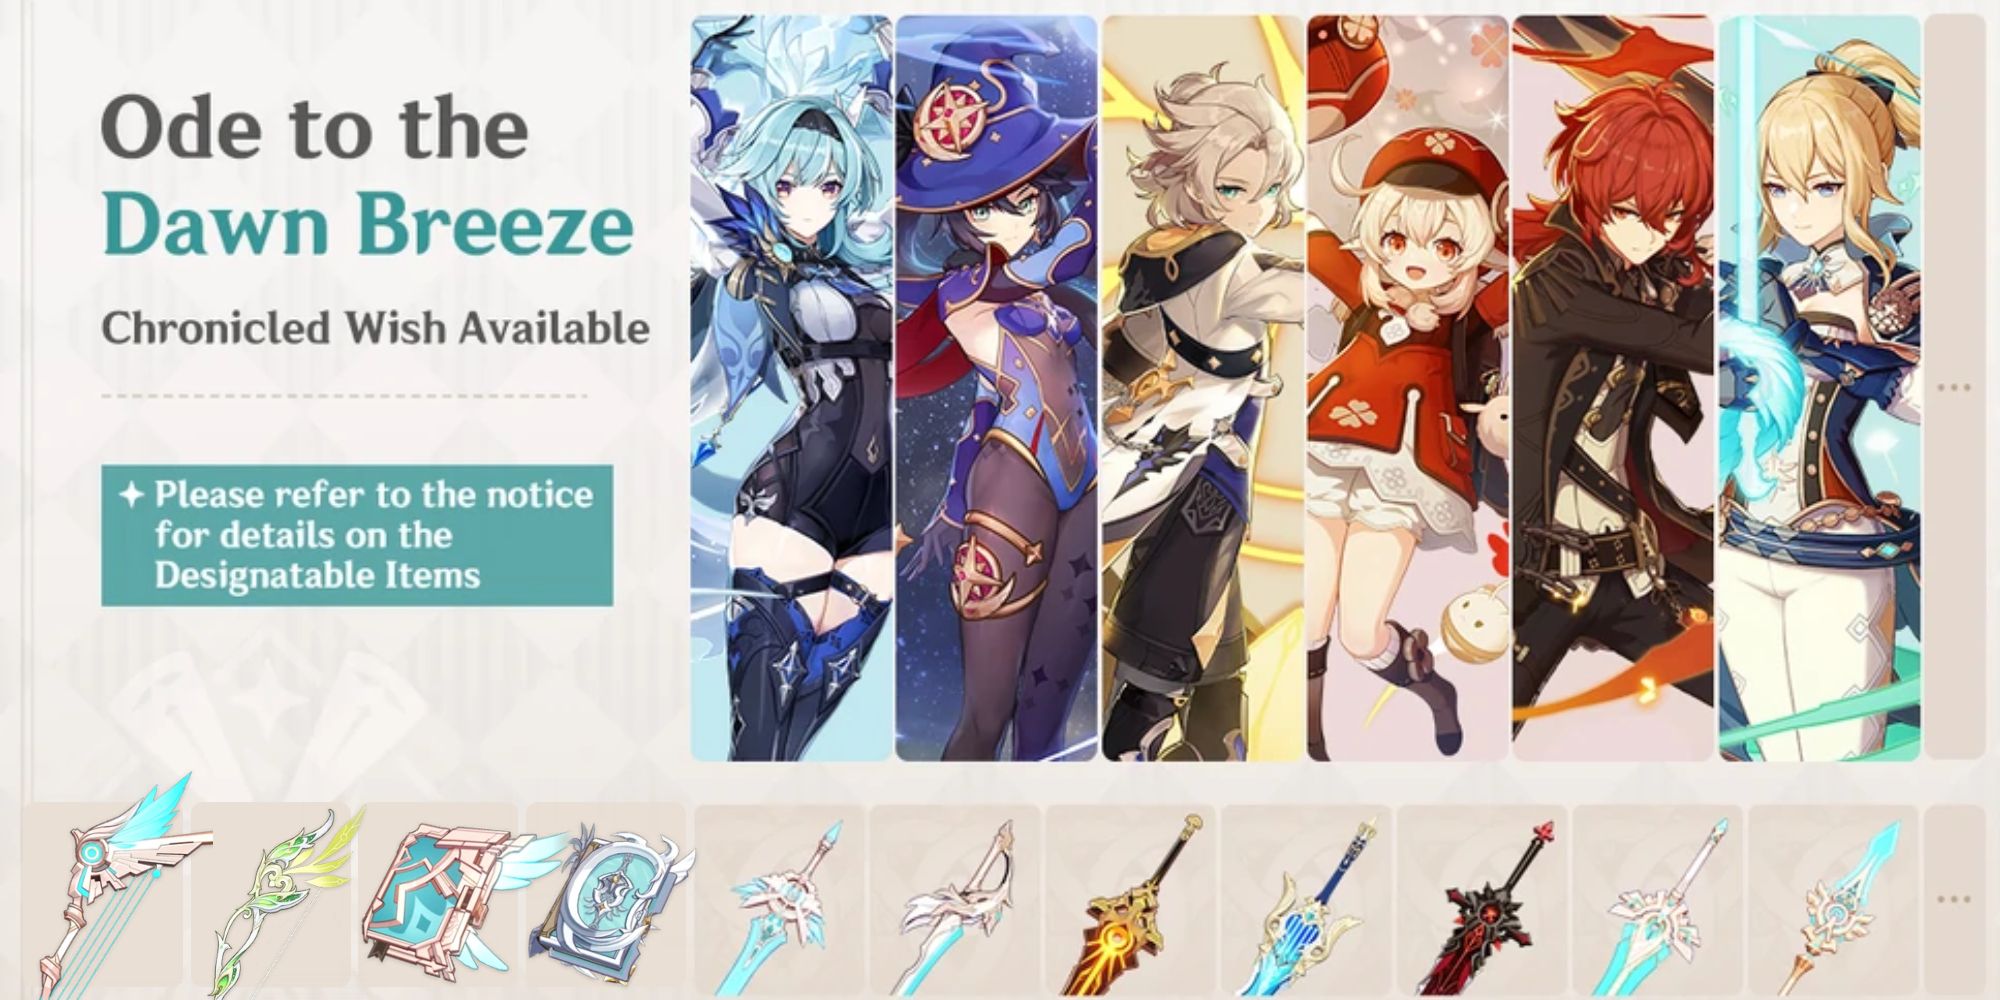 Promotional image of the Ode to the Dawn Breeze Chronicled Wish Banner, featuring Mondstadt characters and a variety of weapons - Genshin Impact 